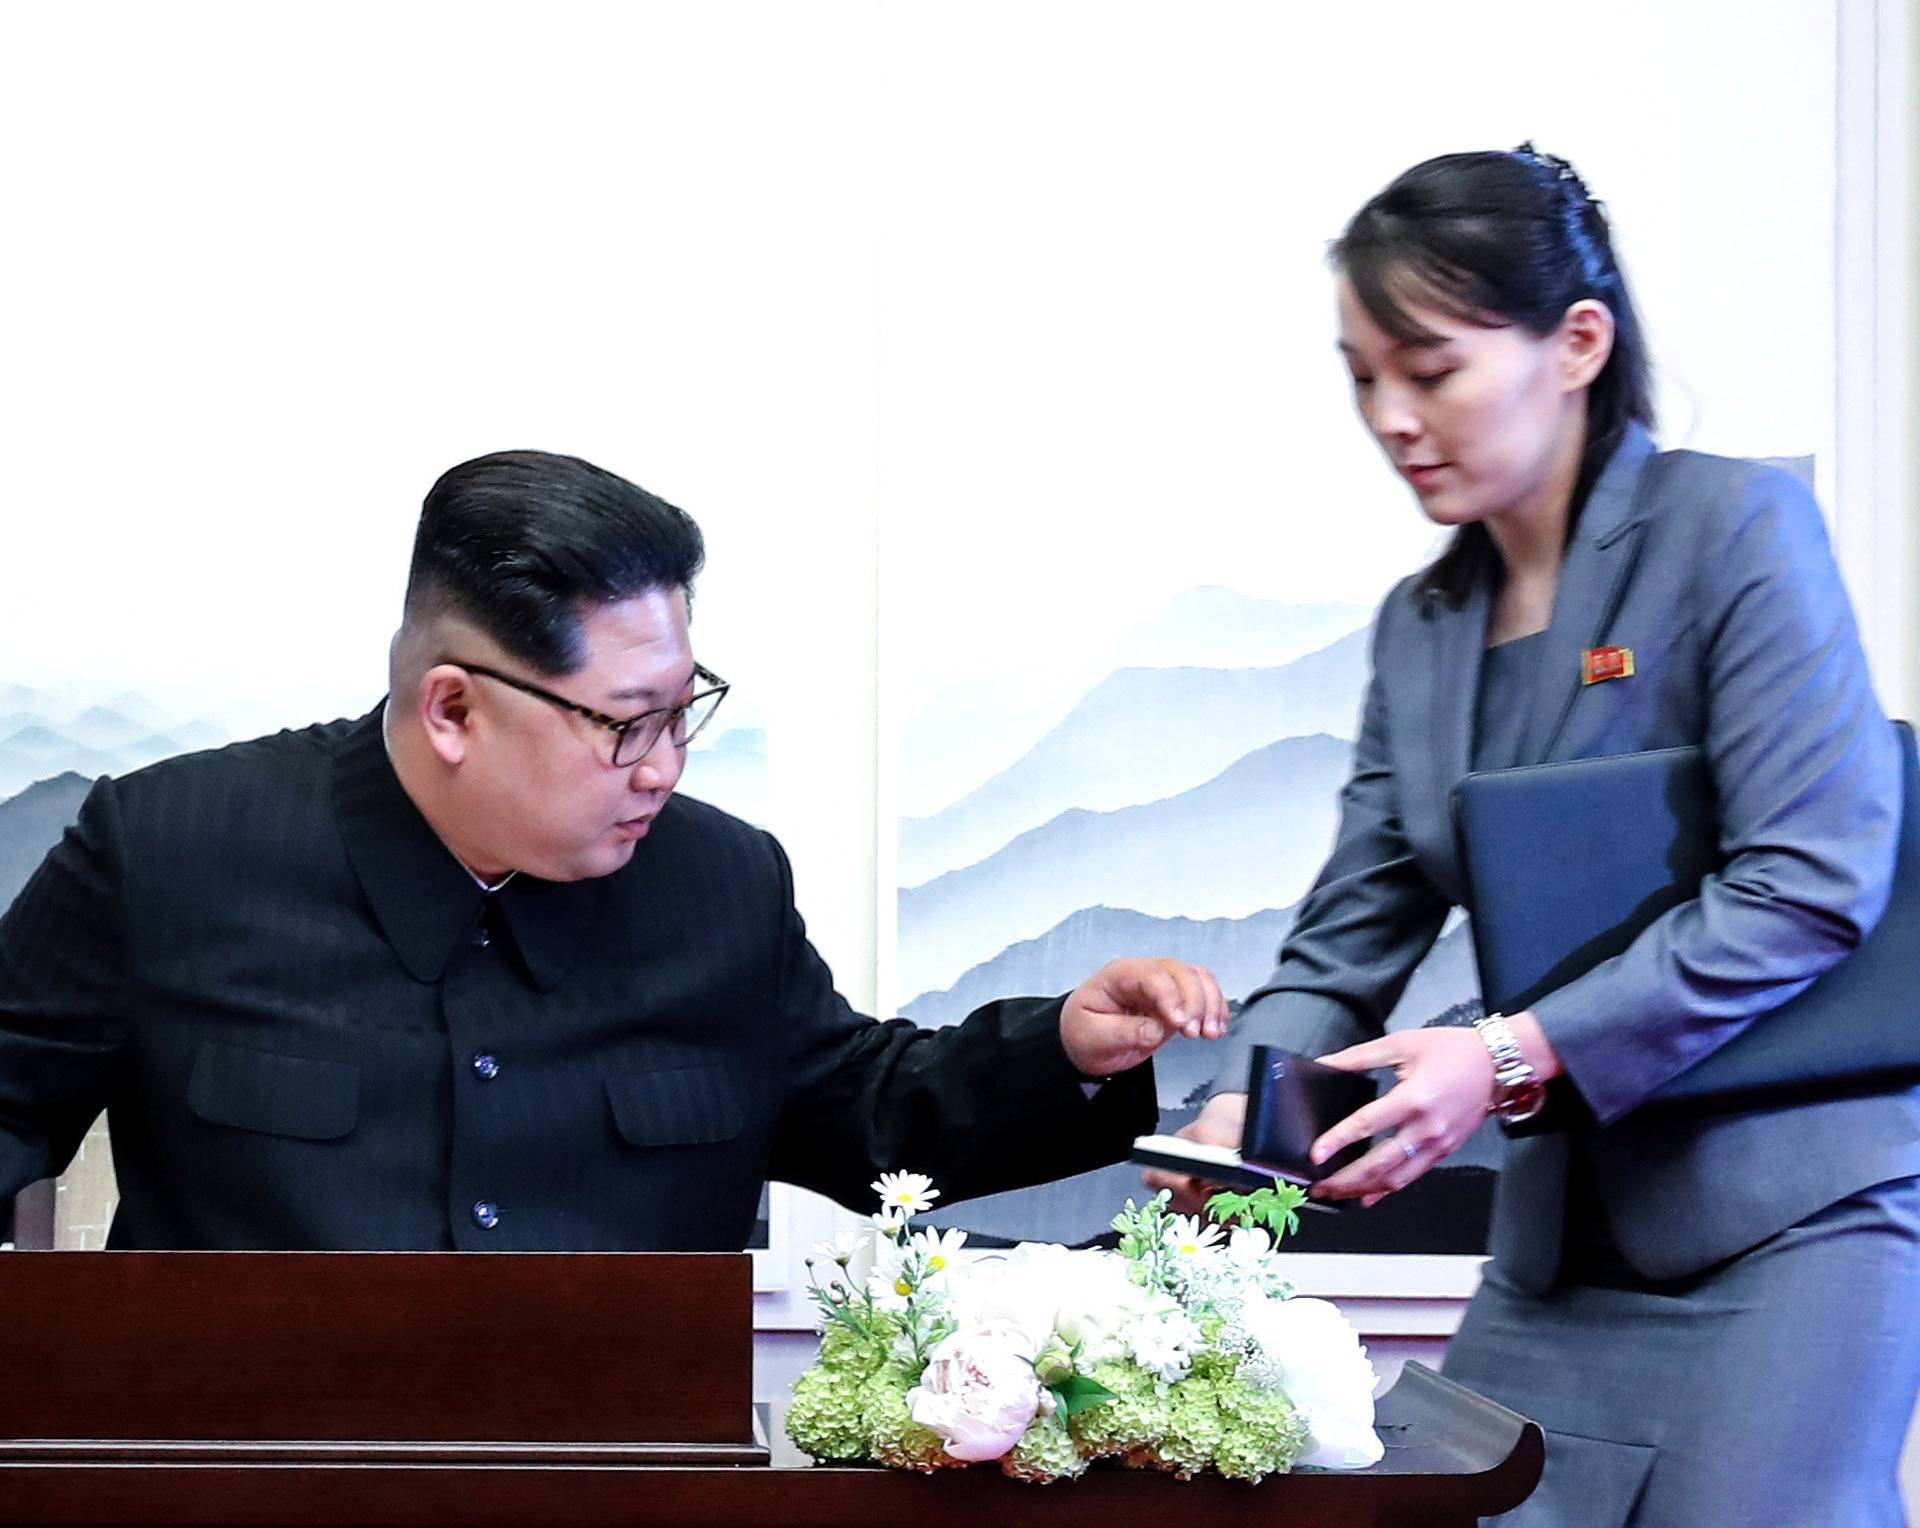 North Korean leader Kim Jong Un prepares to write in a guestbook with his sister Kim Yo Jong during their meeting at the Peace House